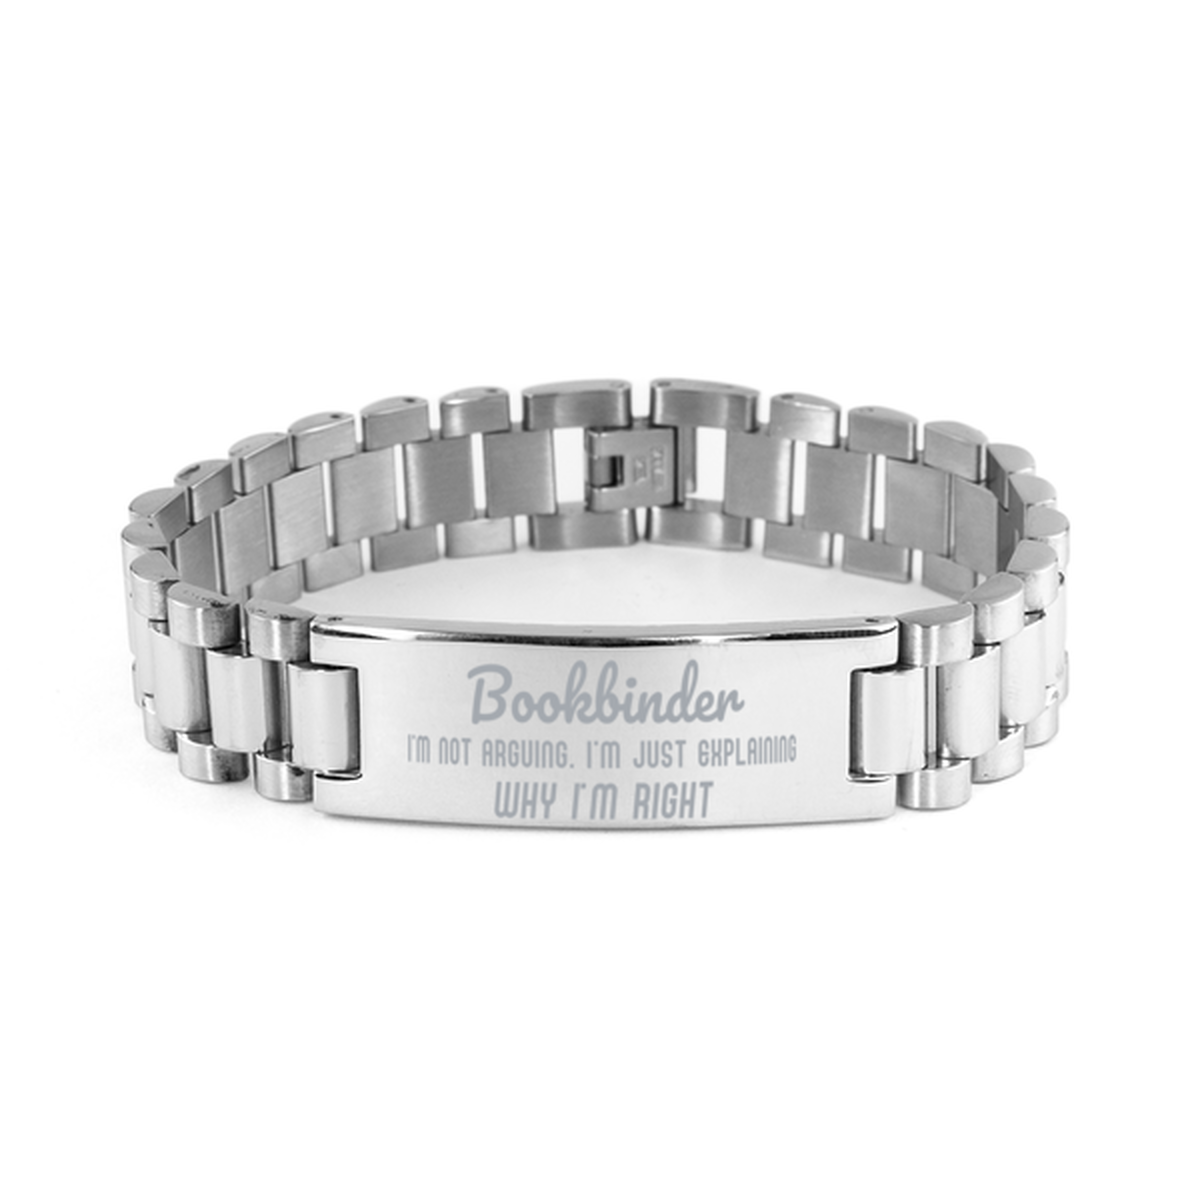 Bookbinder I'm not Arguing. I'm Just Explaining Why I'm RIGHT Ladder Stainless Steel Bracelet, Graduation Birthday Christmas Bookbinder Gifts For Bookbinder Funny Saying Quote Present for Men Women Coworker